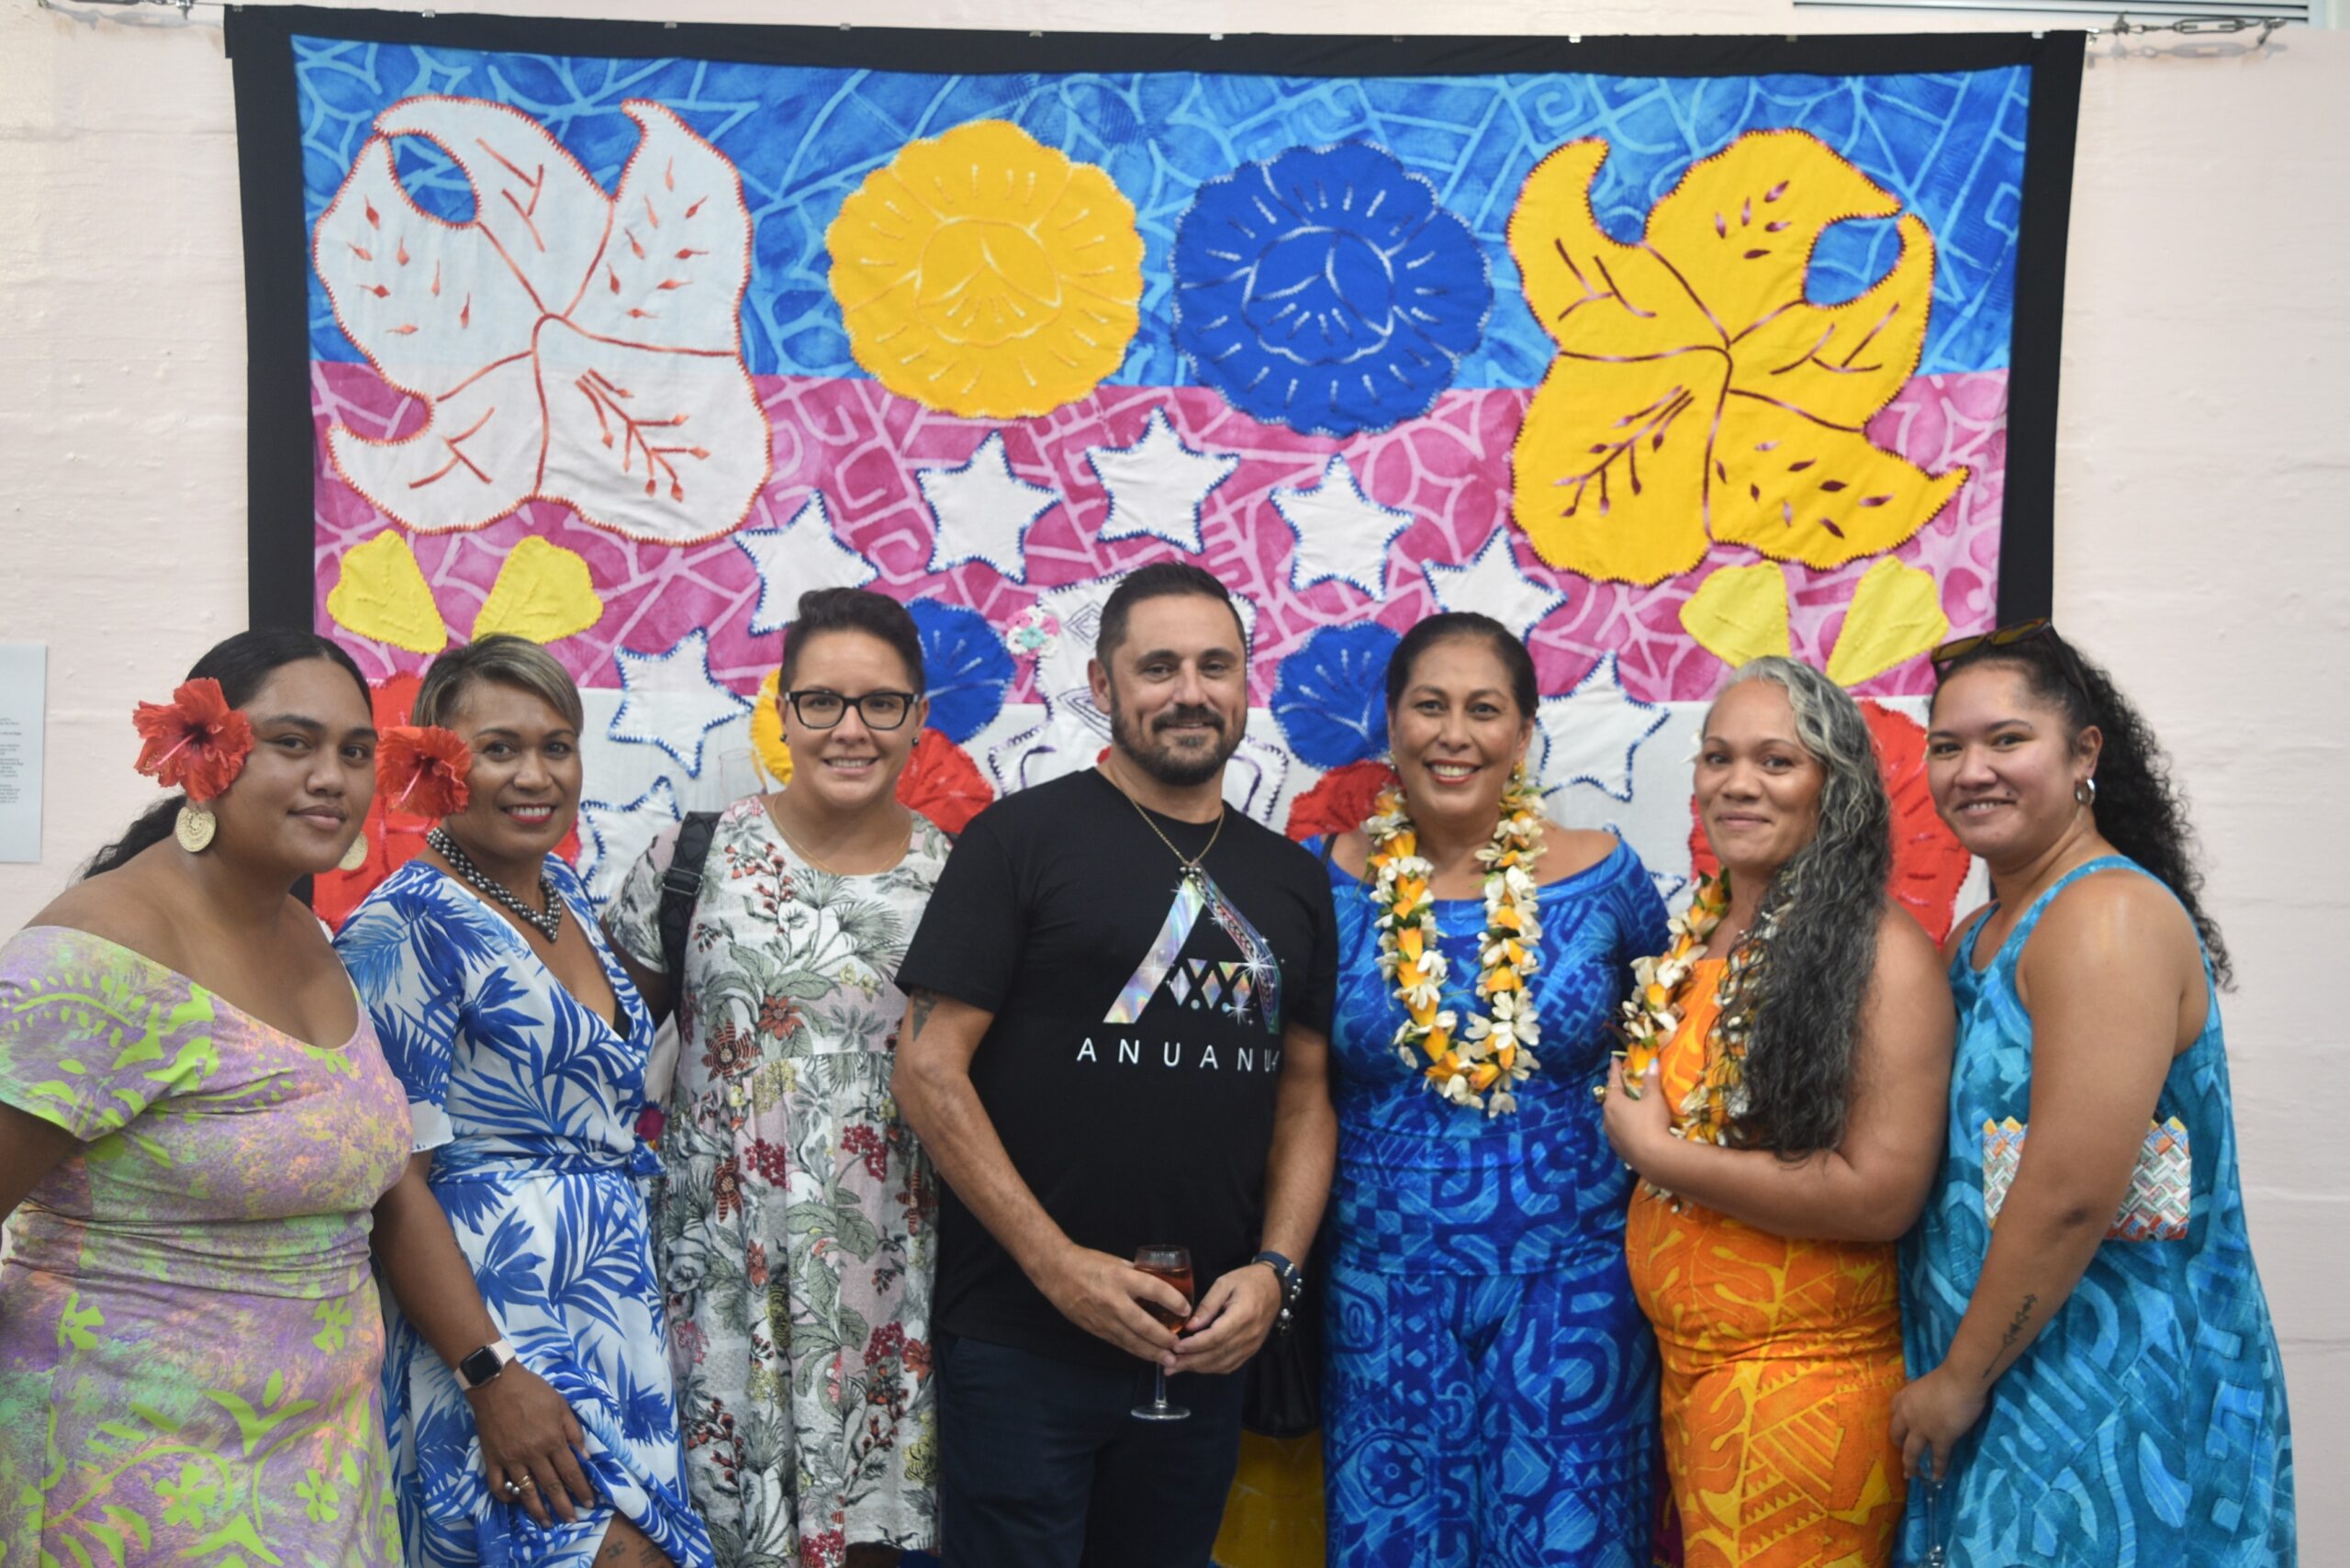 Anuanua Festival marks historic shift towards equality in the Cook Islands